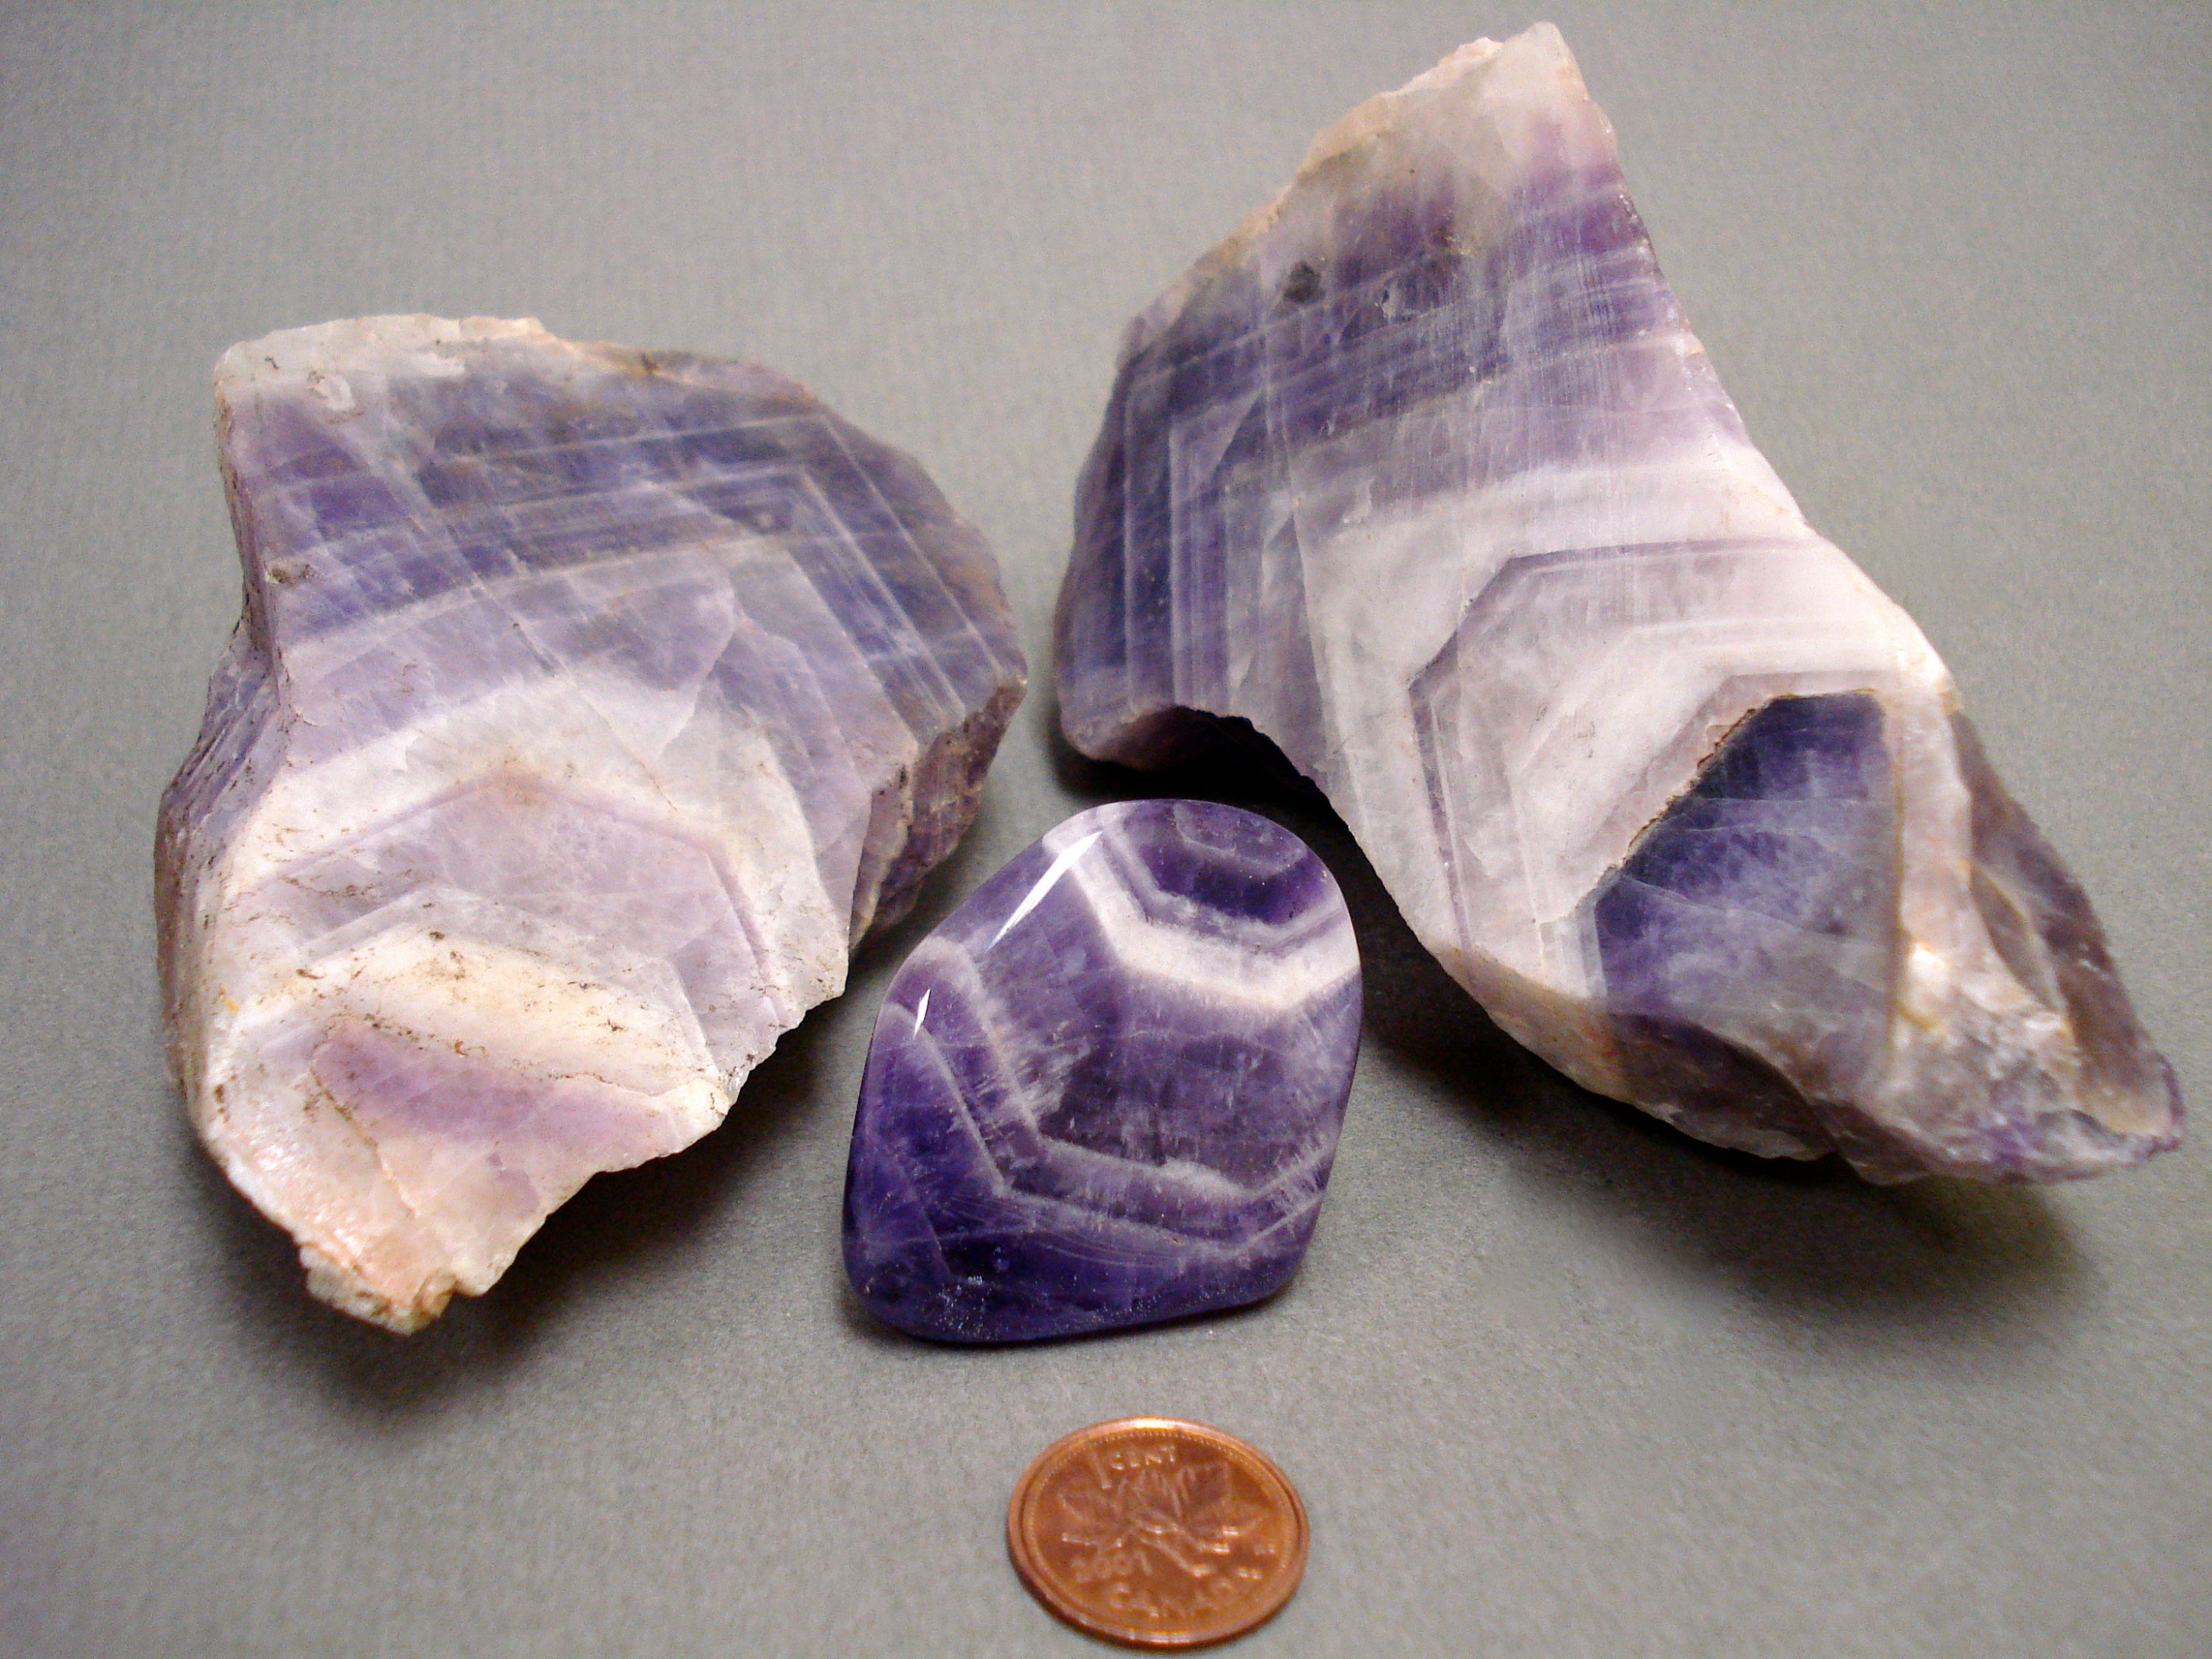 Chevron Amethyst next to a penny for size comparison